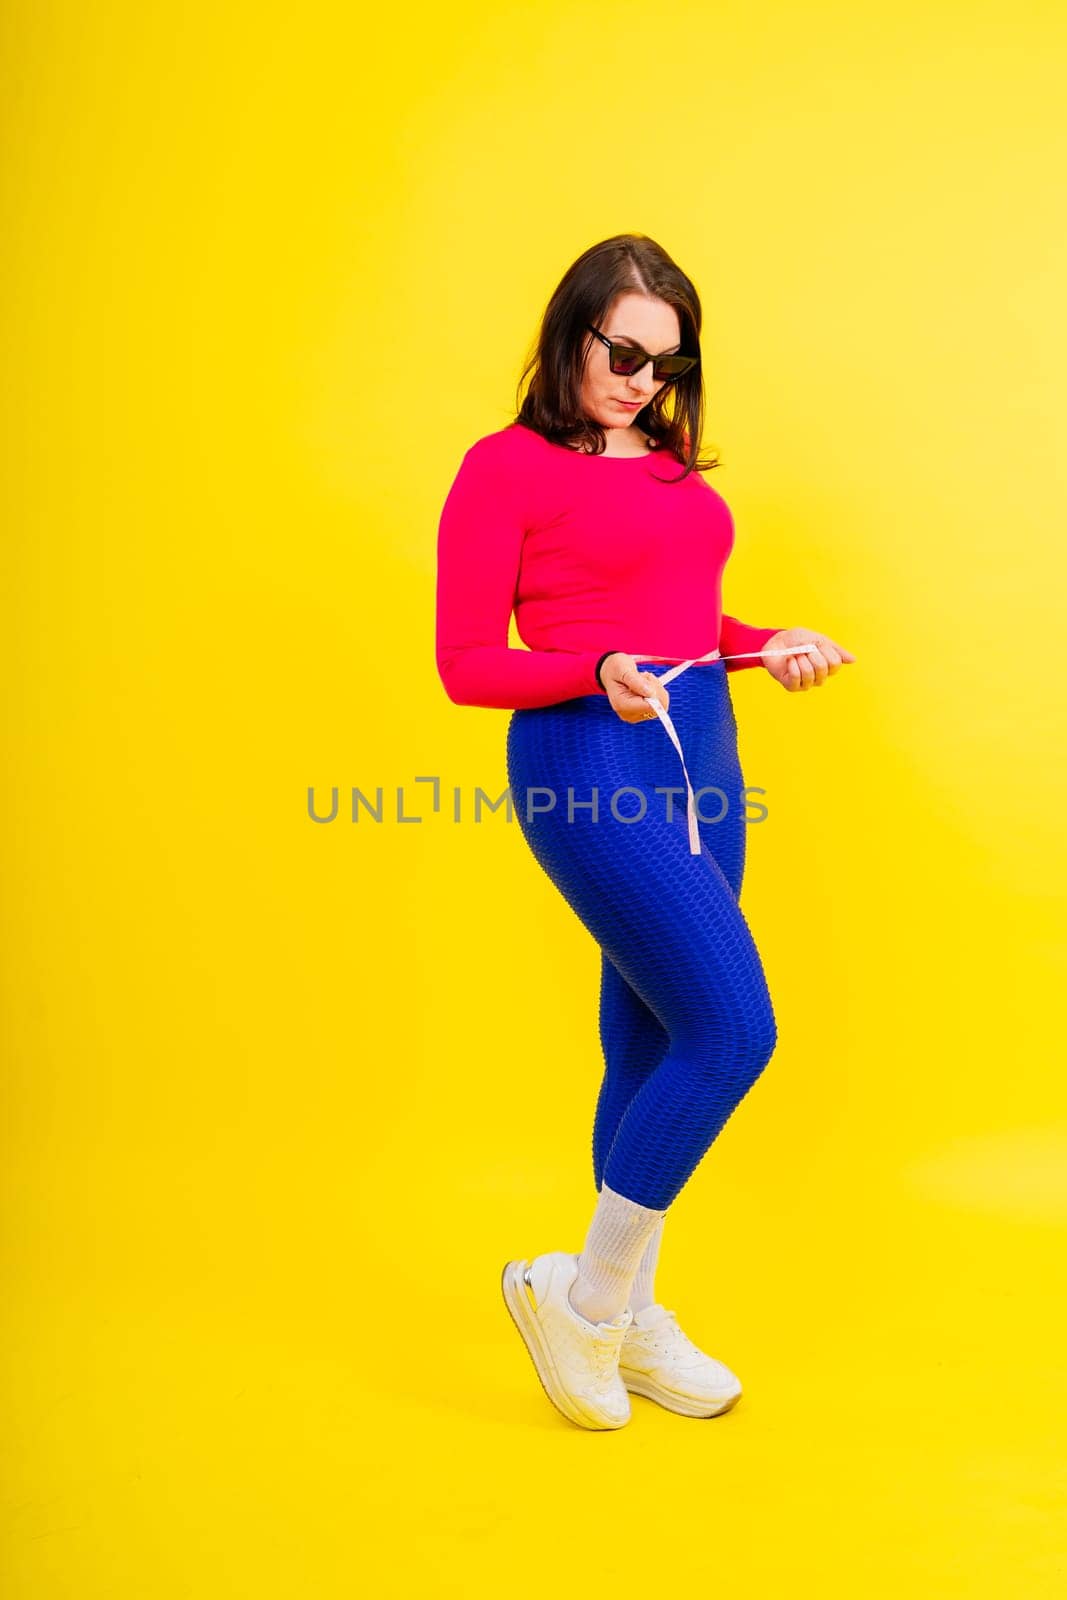 Overweight woman measuring waist before weight loss in studio shot on yellow background by Zelenin